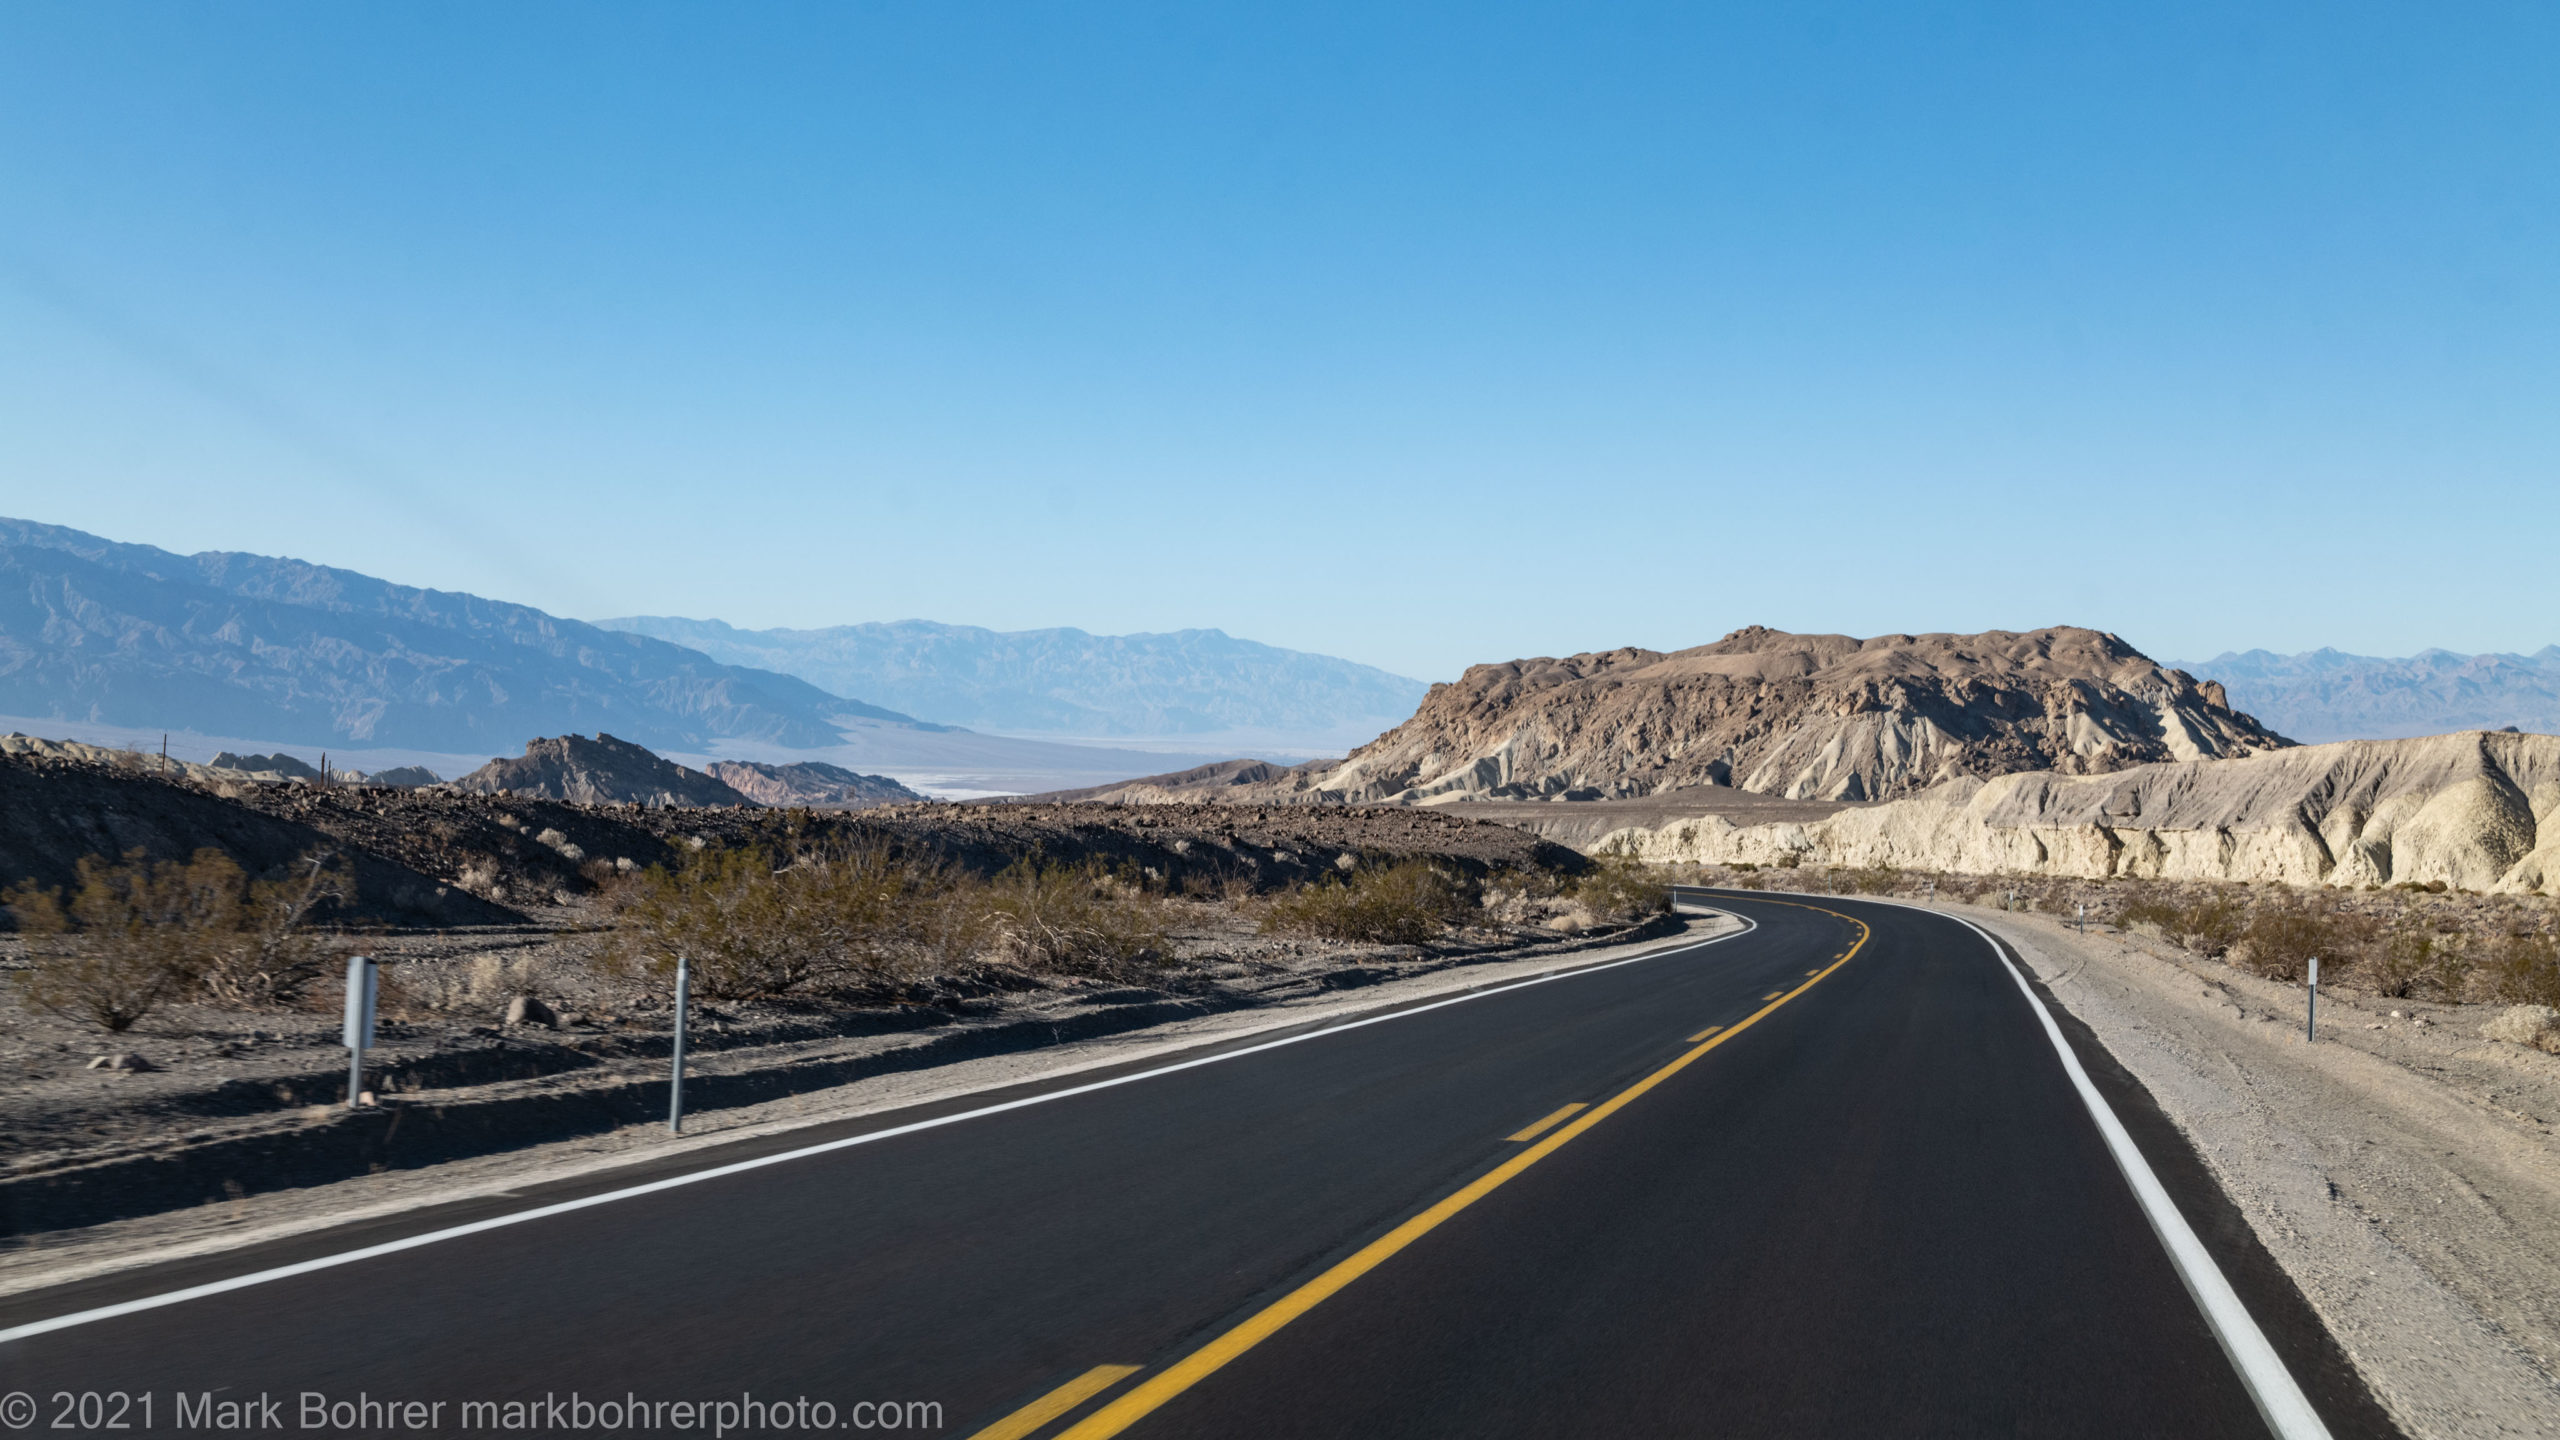 The paved ride was easy - Death Valley